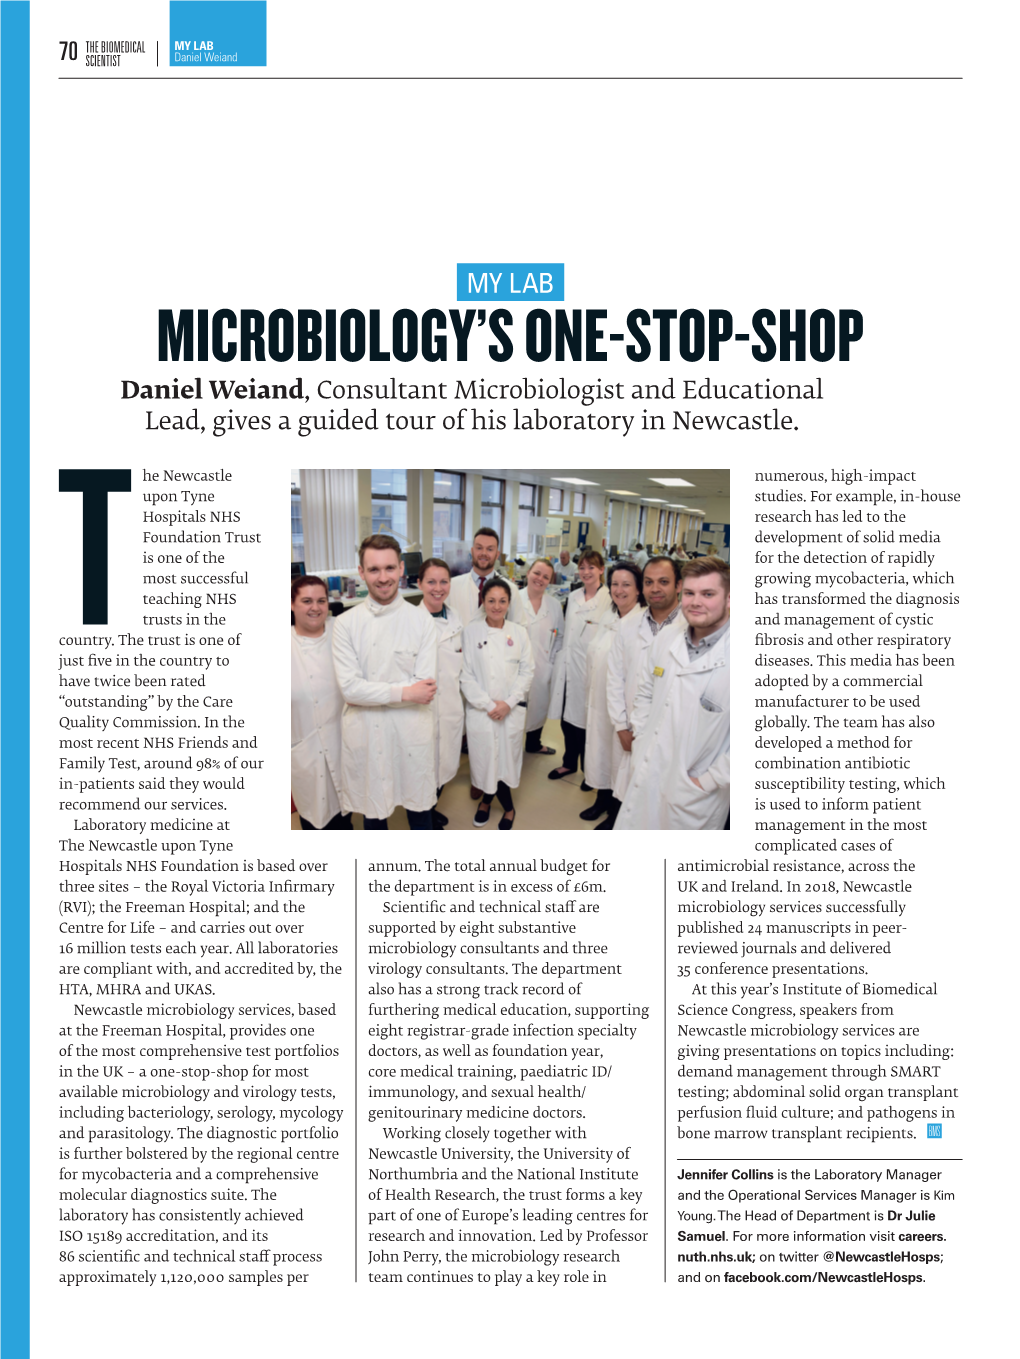 Microbiology's One-Stop-Shop